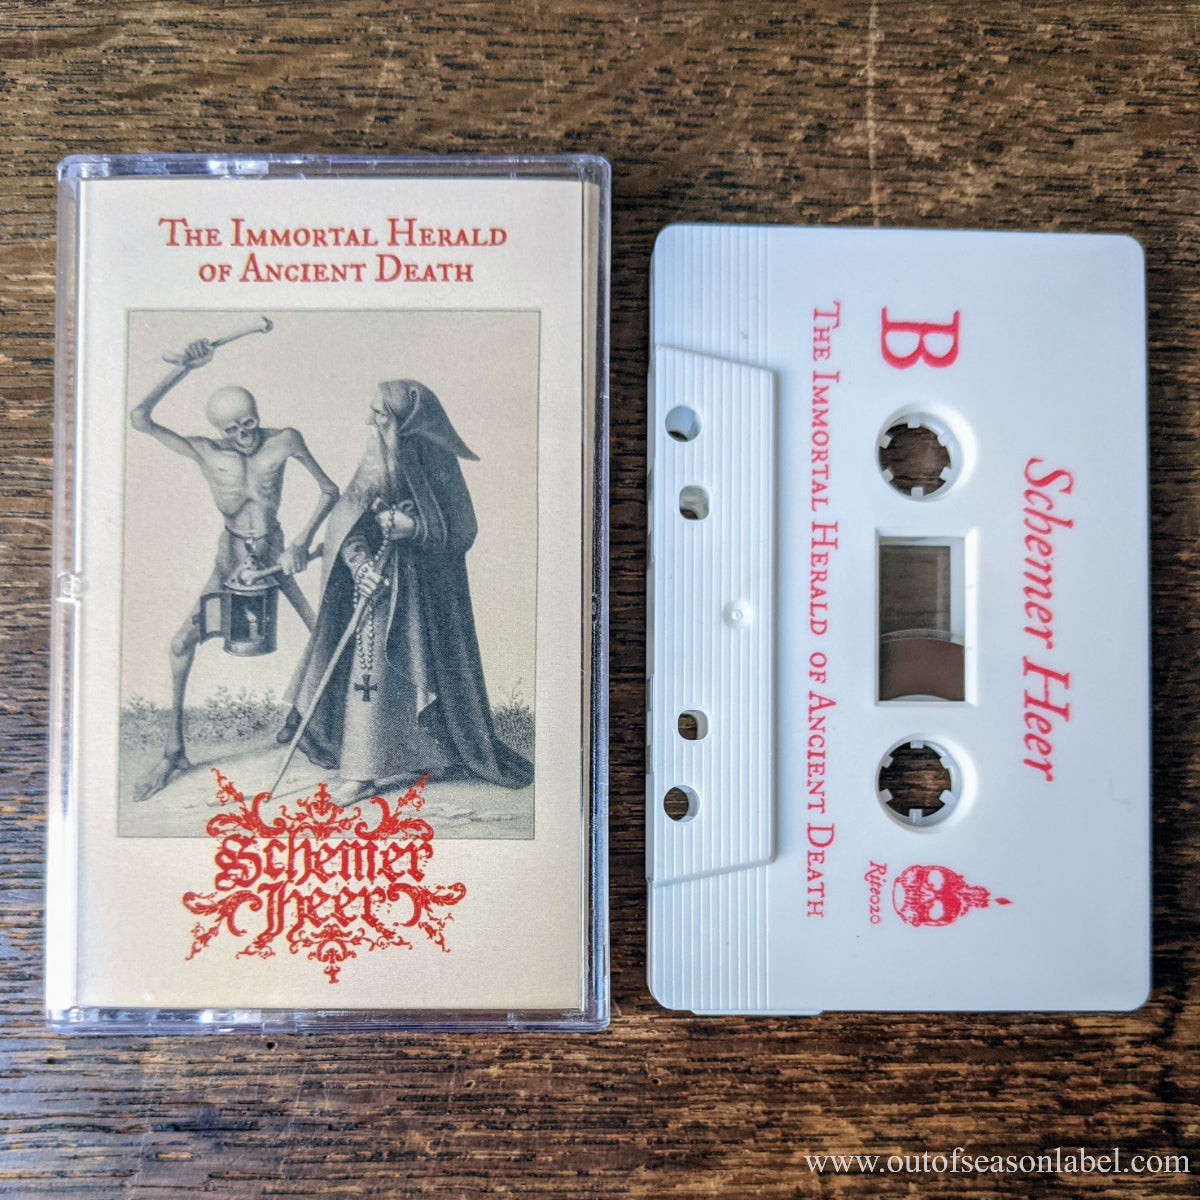 [SOLD OUT] SCHEMER HEER "The Immortal Herald Of Ancient Death" Cassette Tape (Lim. 100)